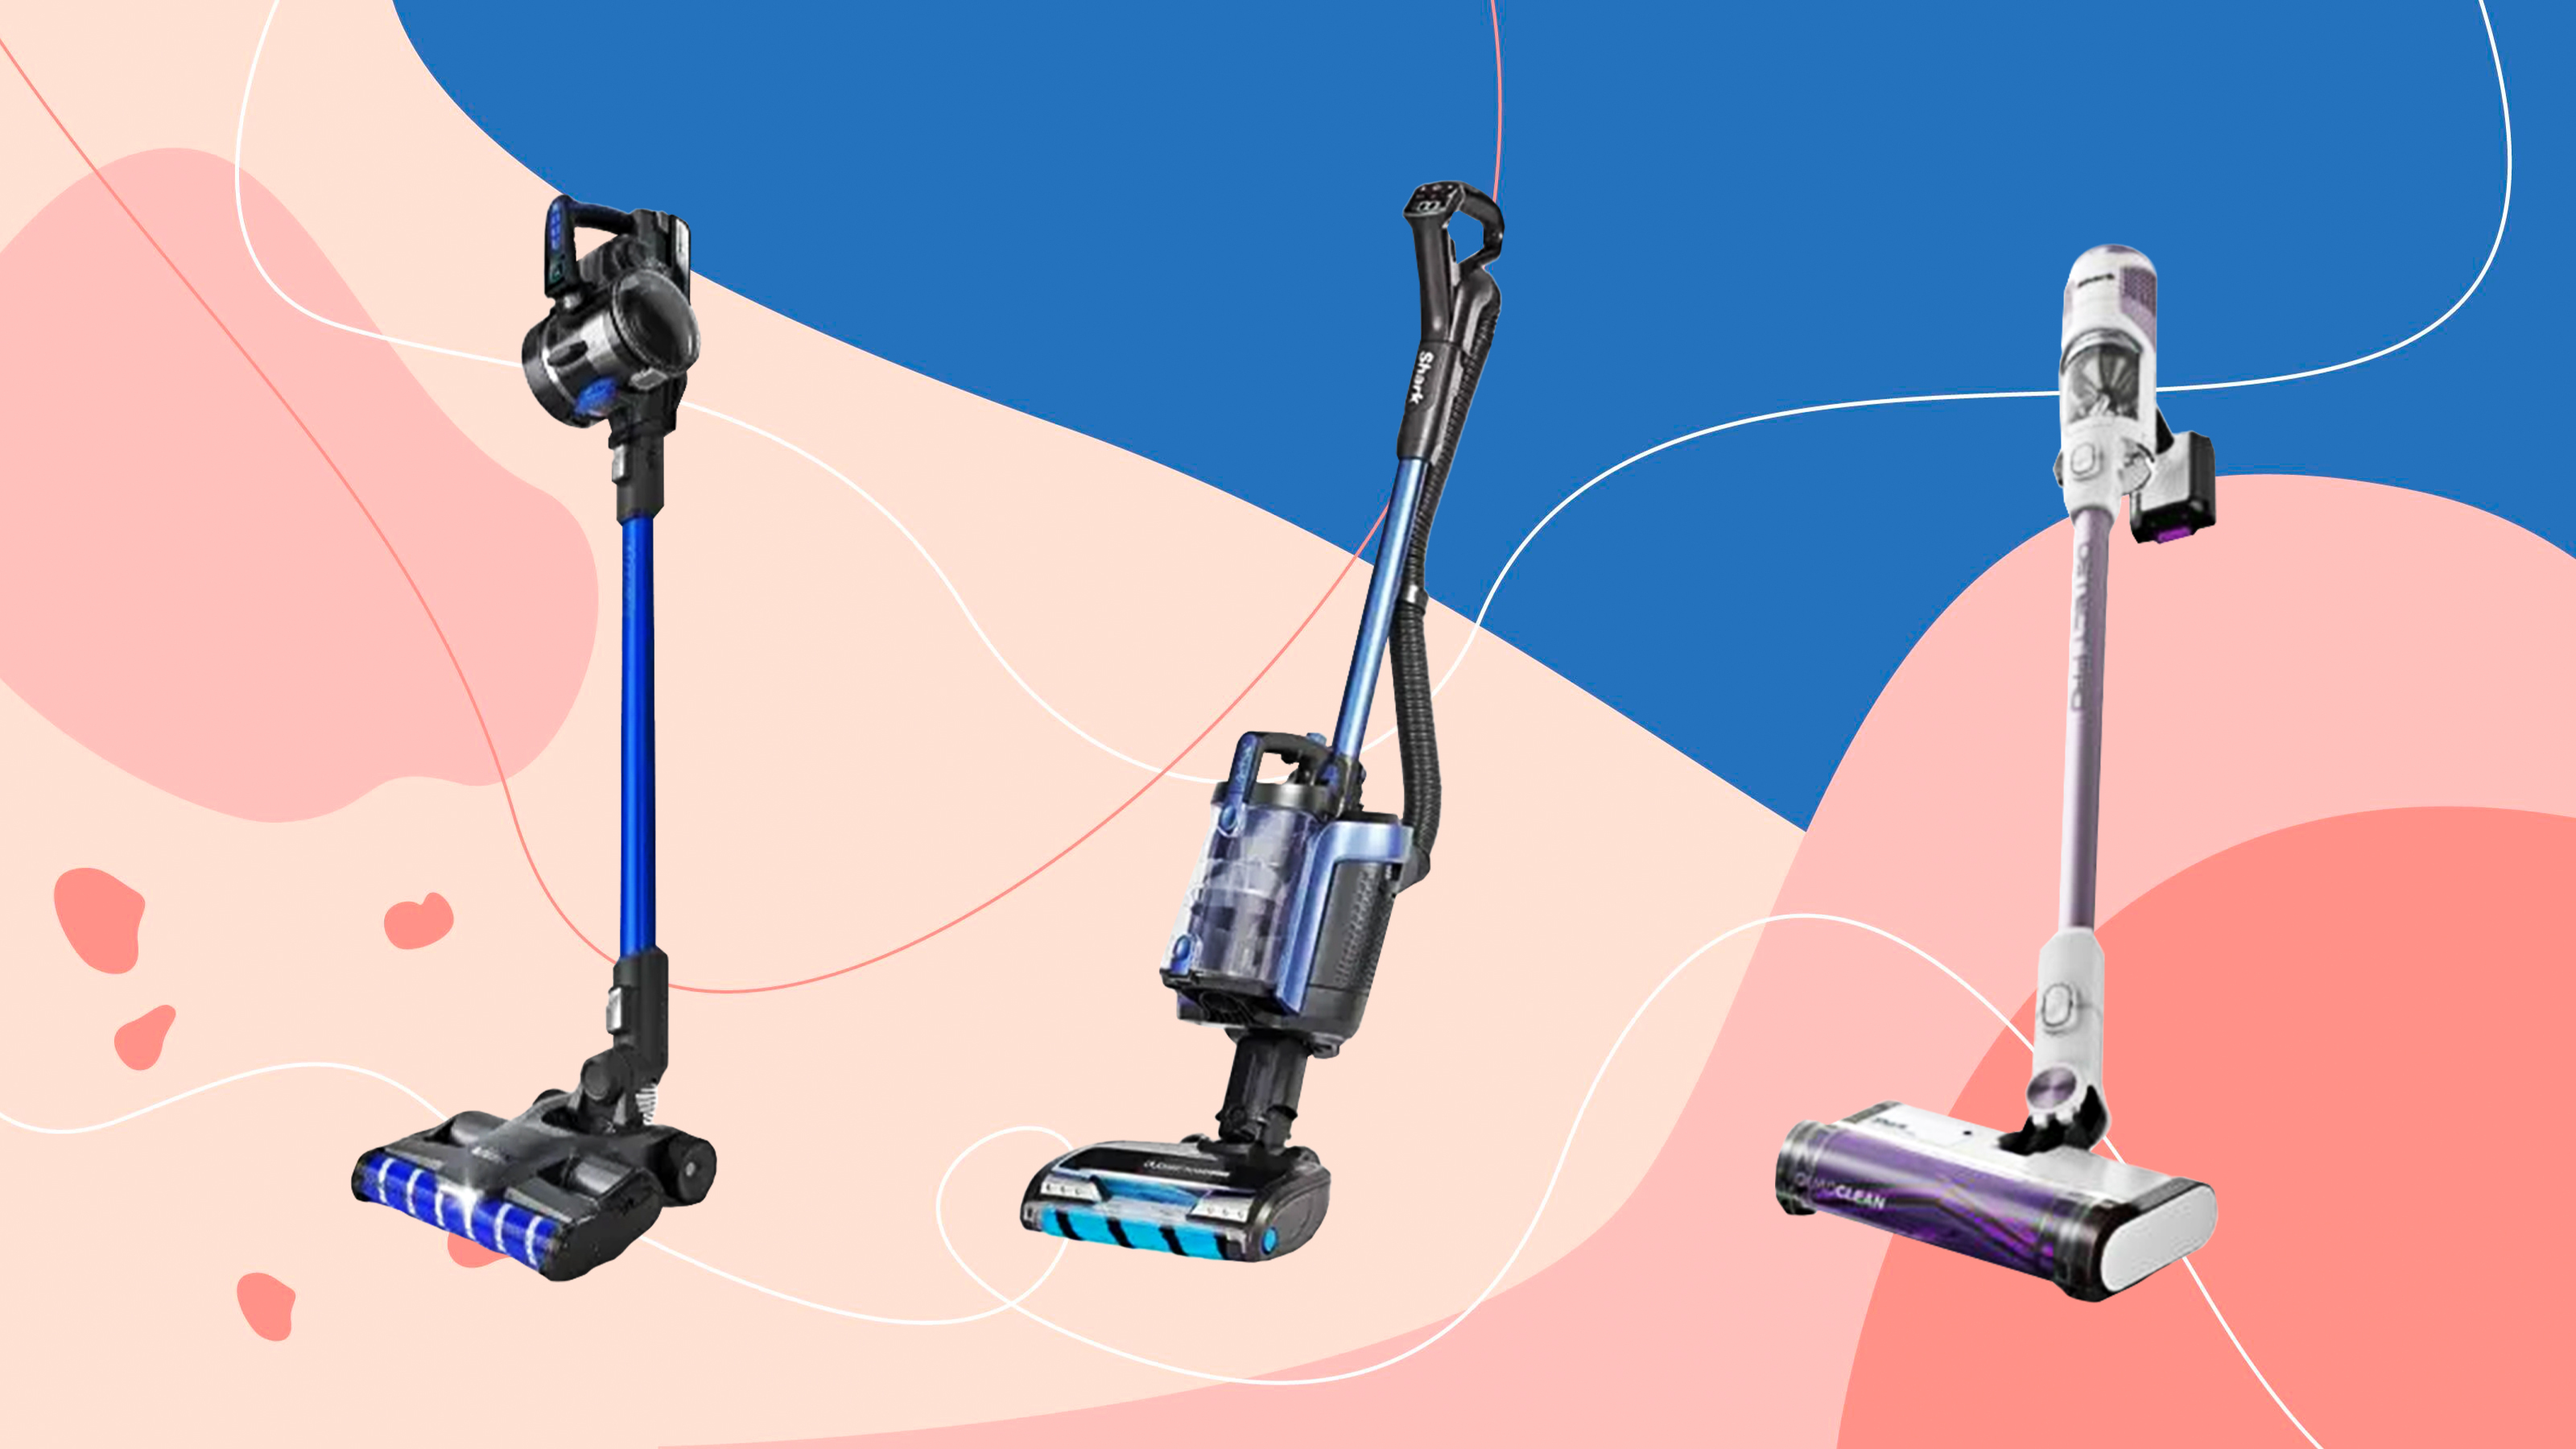 PowerCleany Vacuum Cleaner [Video]  Cordless vacuum cleaner, Vacuum  cleaner, Portable vacuum